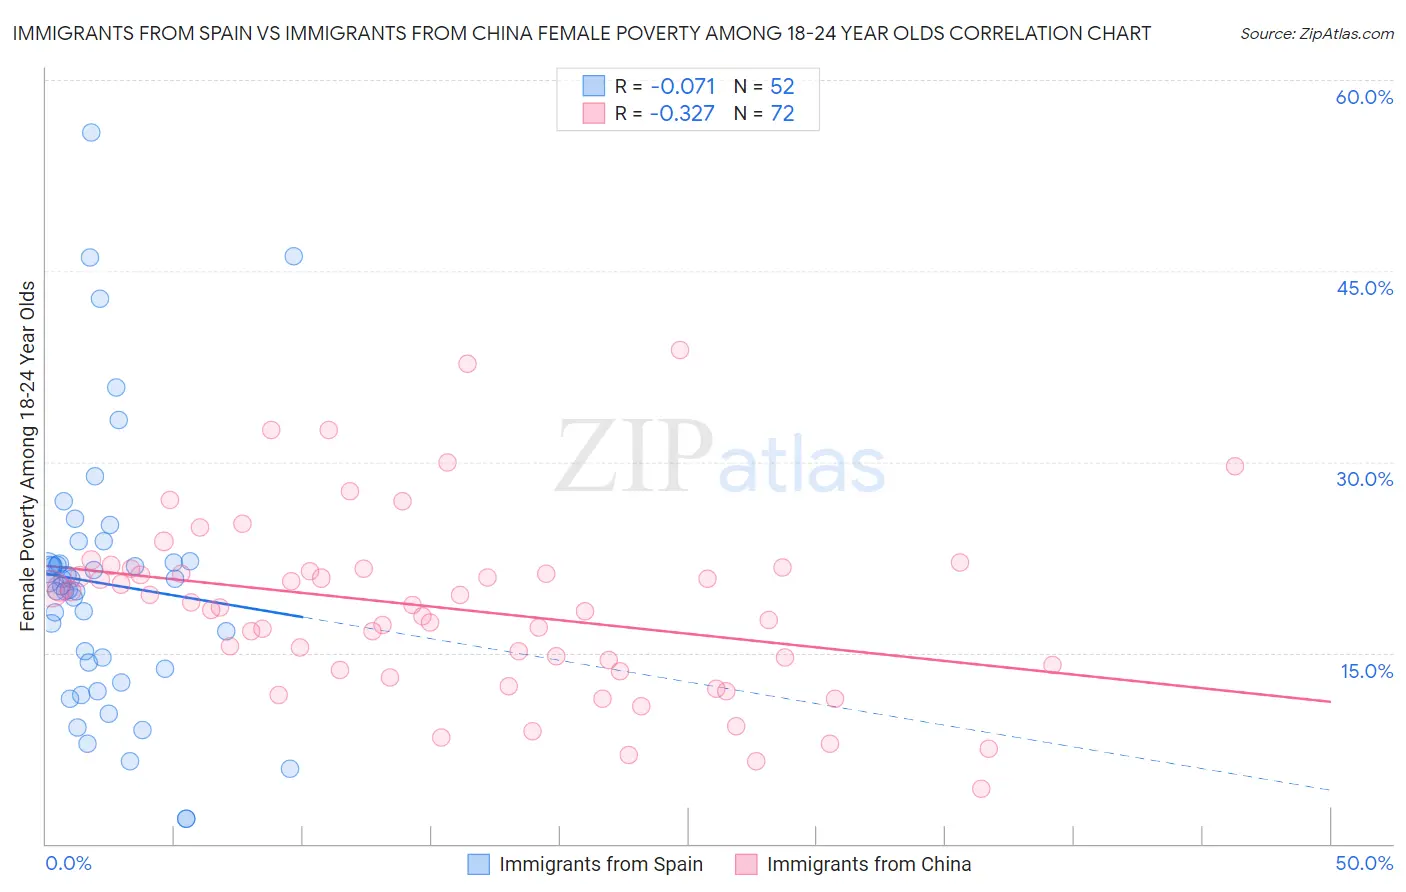 Immigrants from Spain vs Immigrants from China Female Poverty Among 18-24 Year Olds